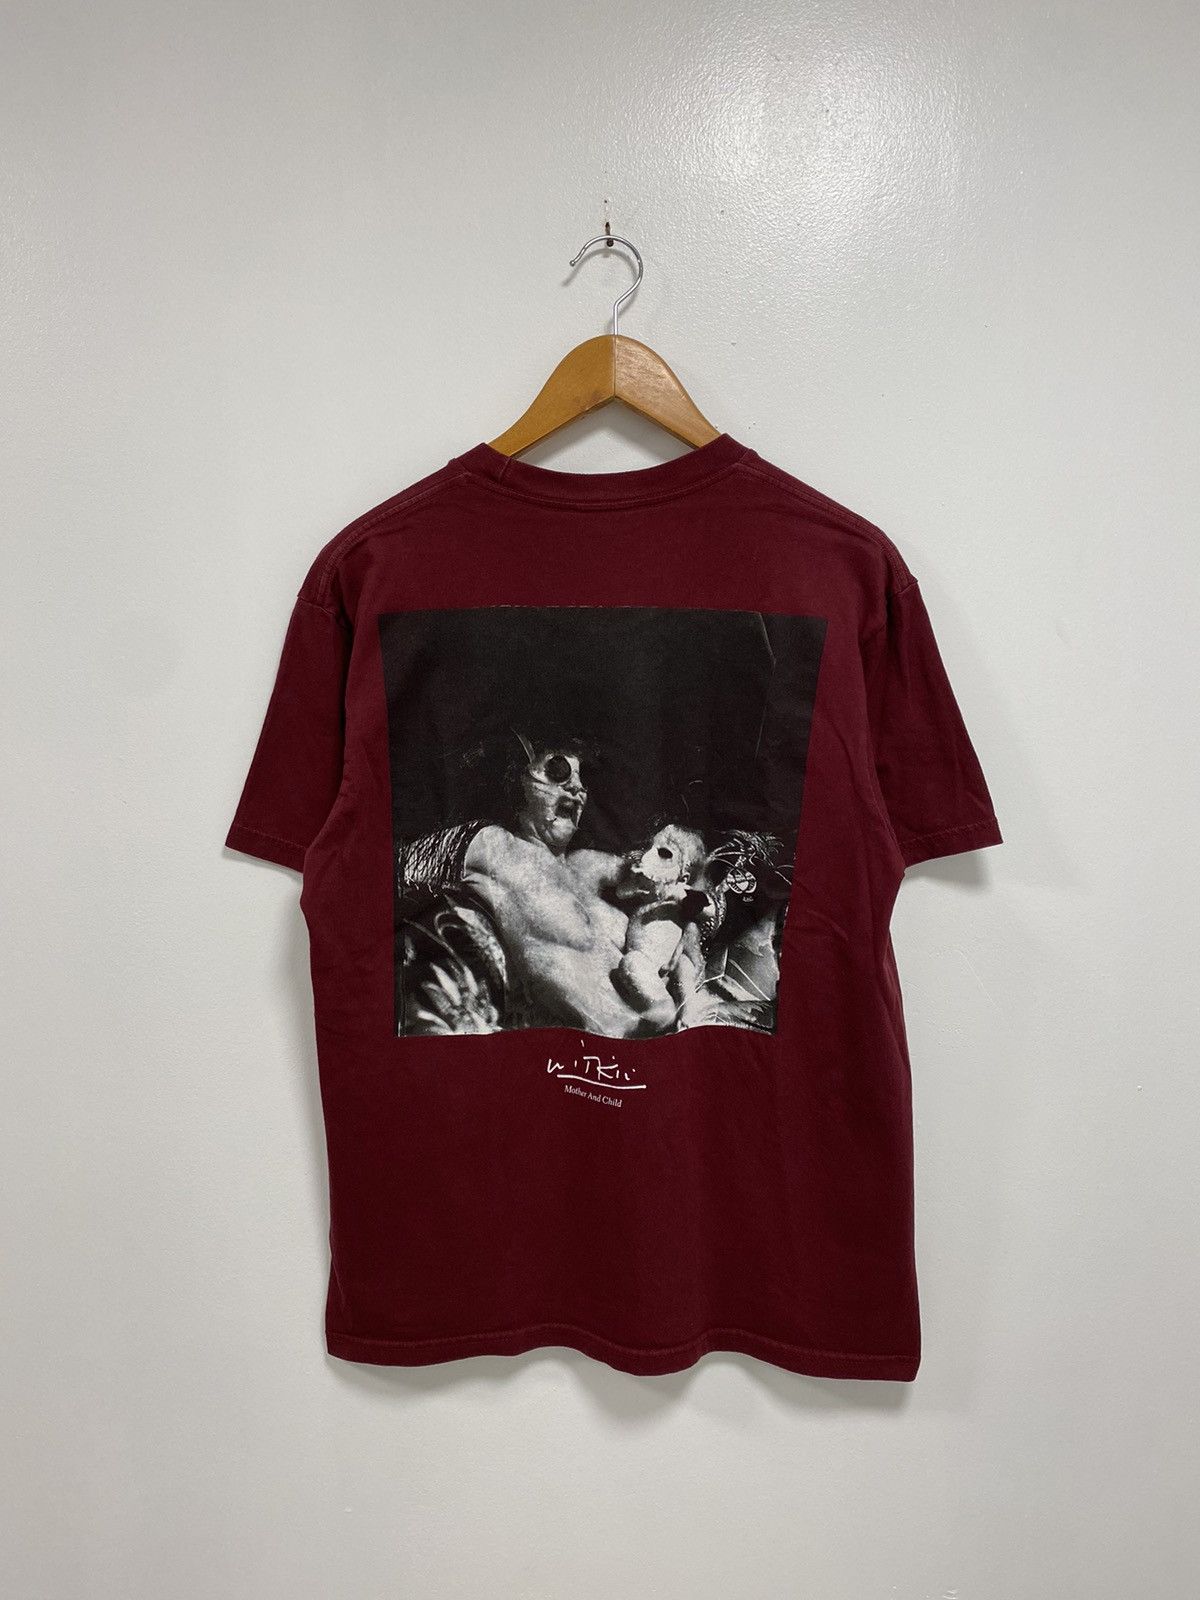 Supreme Supreme Joel Peter witkin mother and child t shirt | Grailed